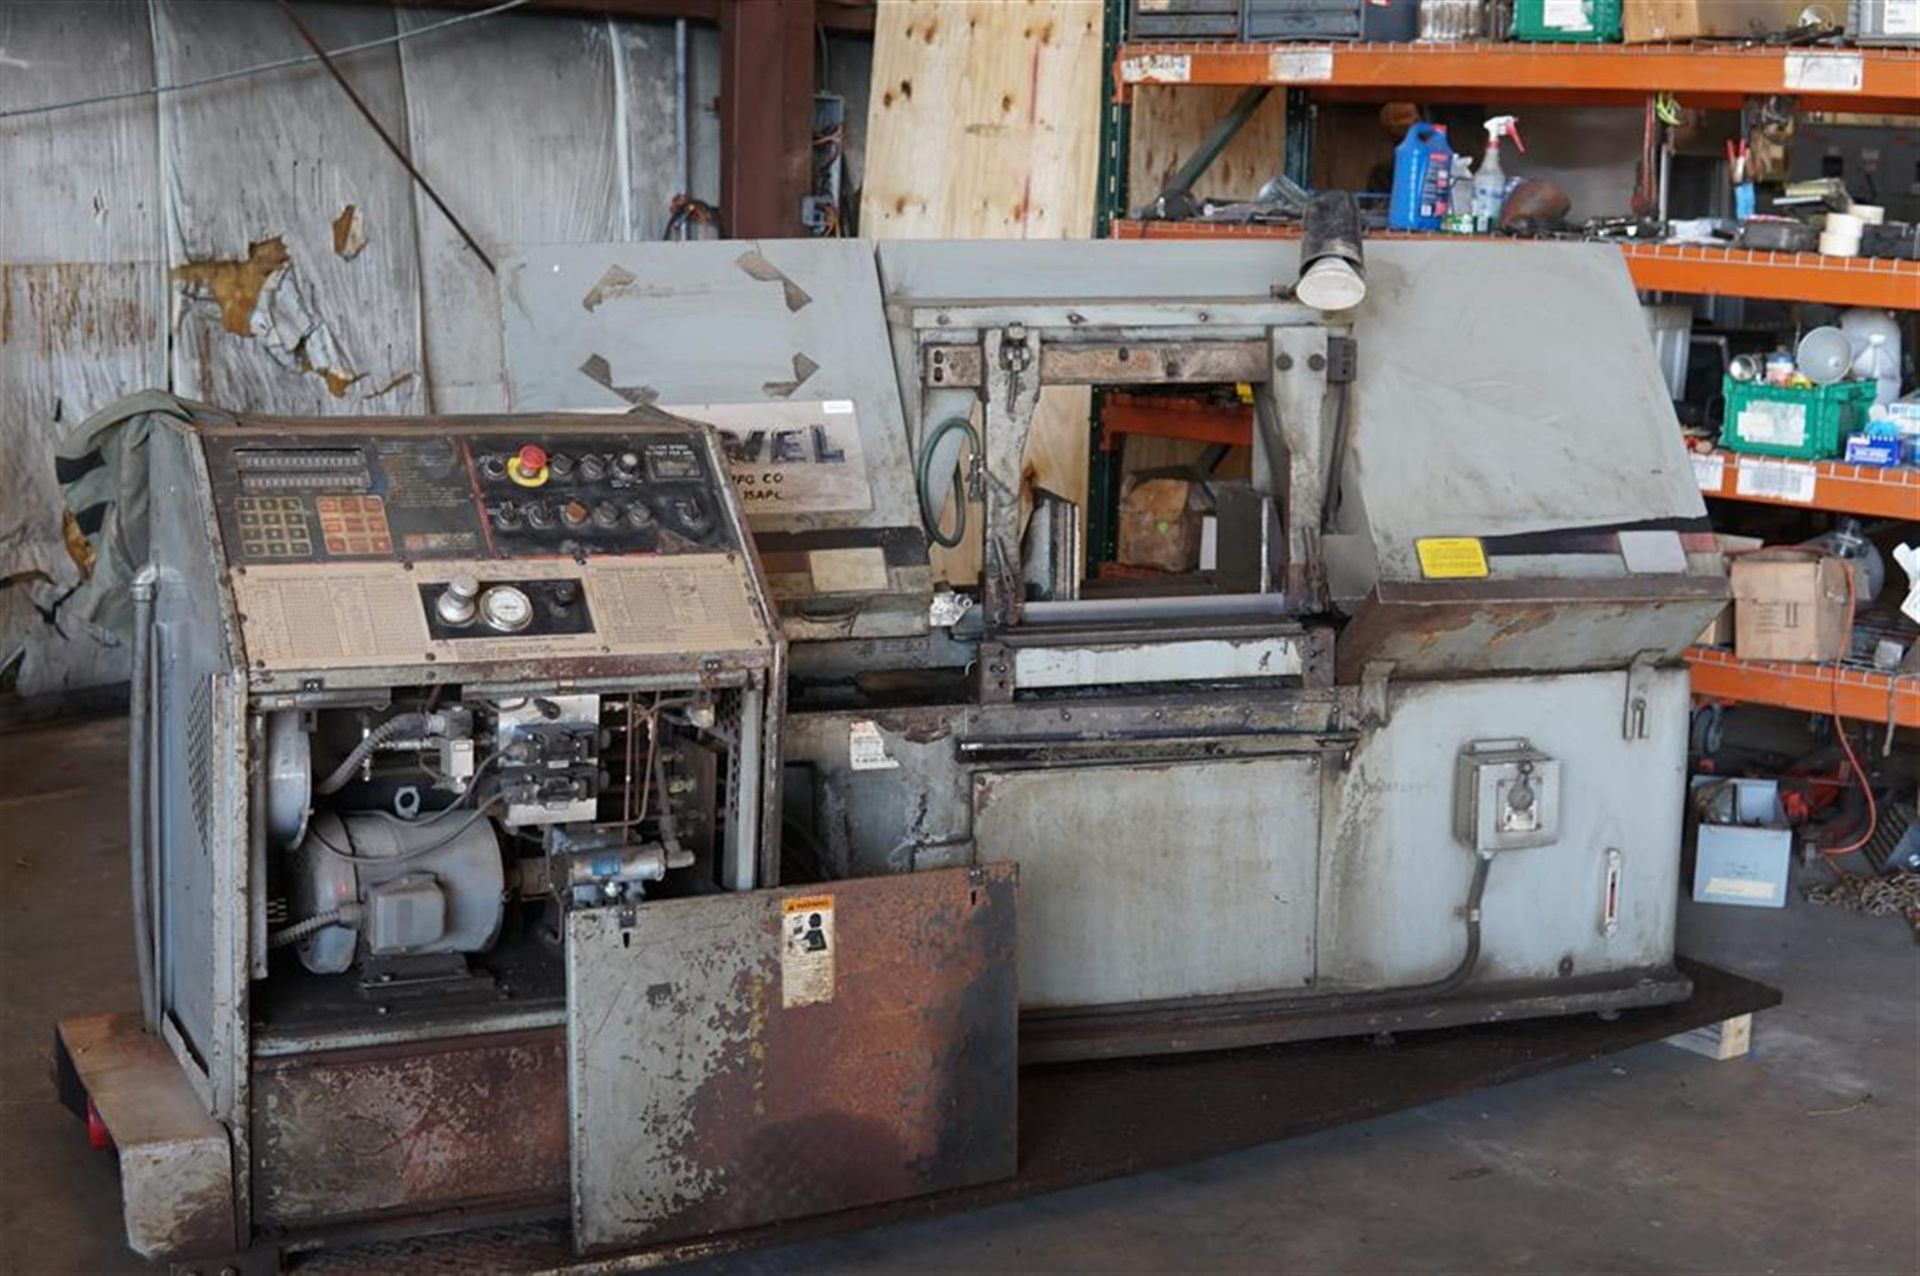 Marvel 15A9PC Horizontal Band Saw (PLATE NOT INCLUDED)-LOADING FEE $150 - Image 13 of 13